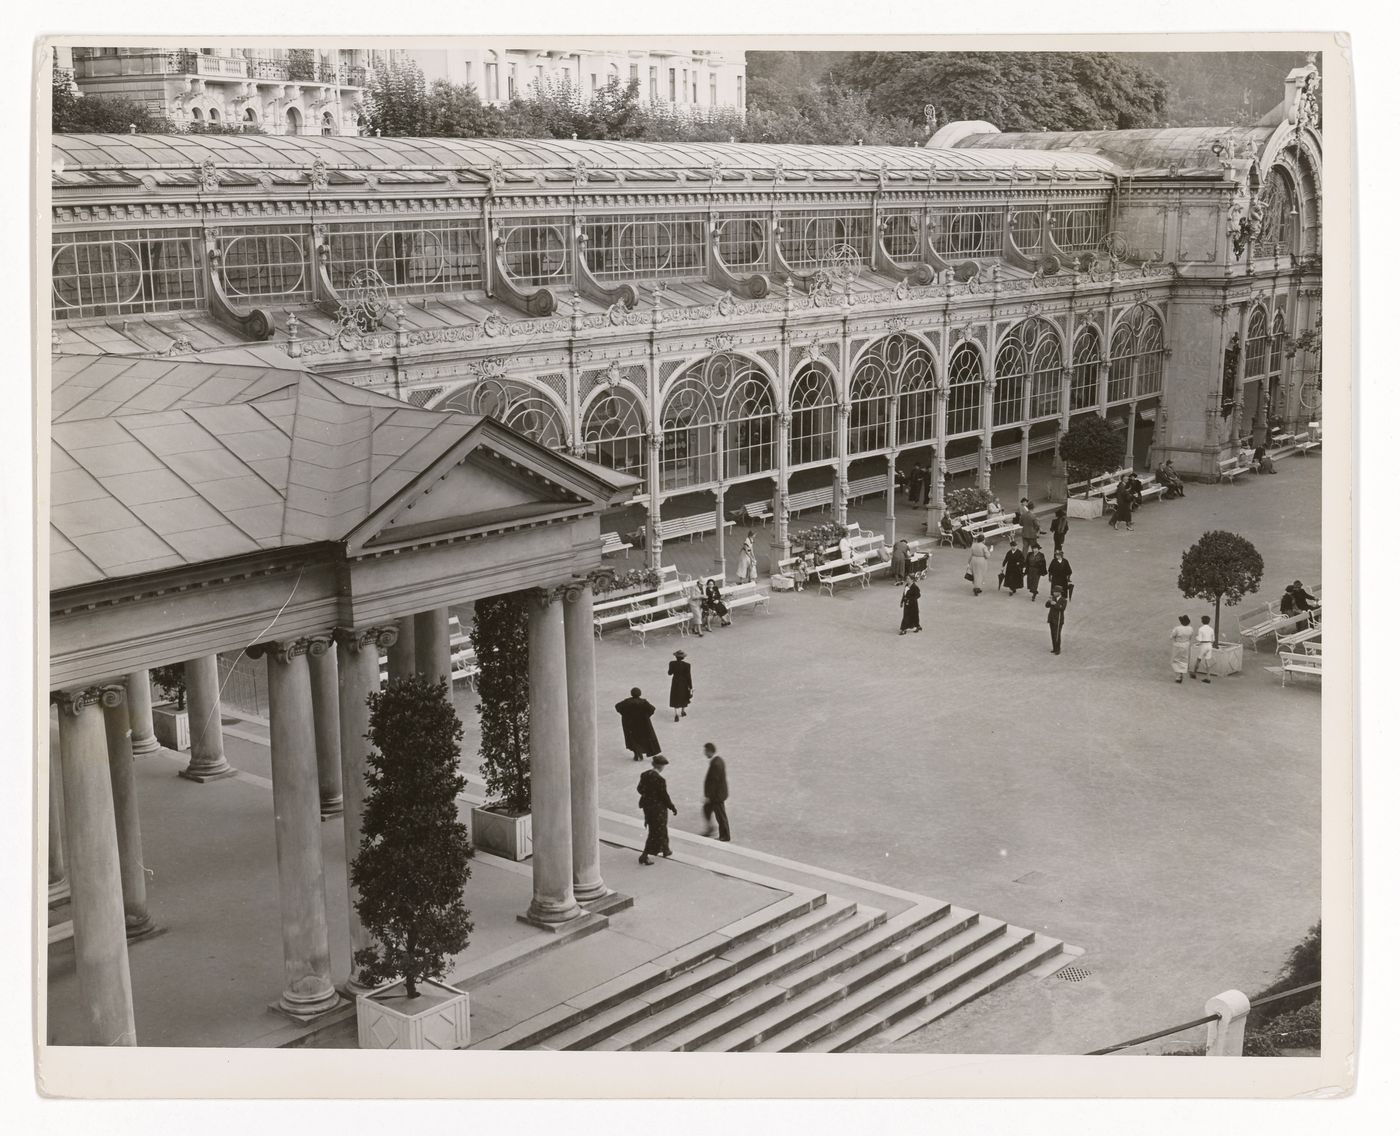 View of iron and glass patio and open square, from elevated viewpoint, Marienbad, Czech Republic